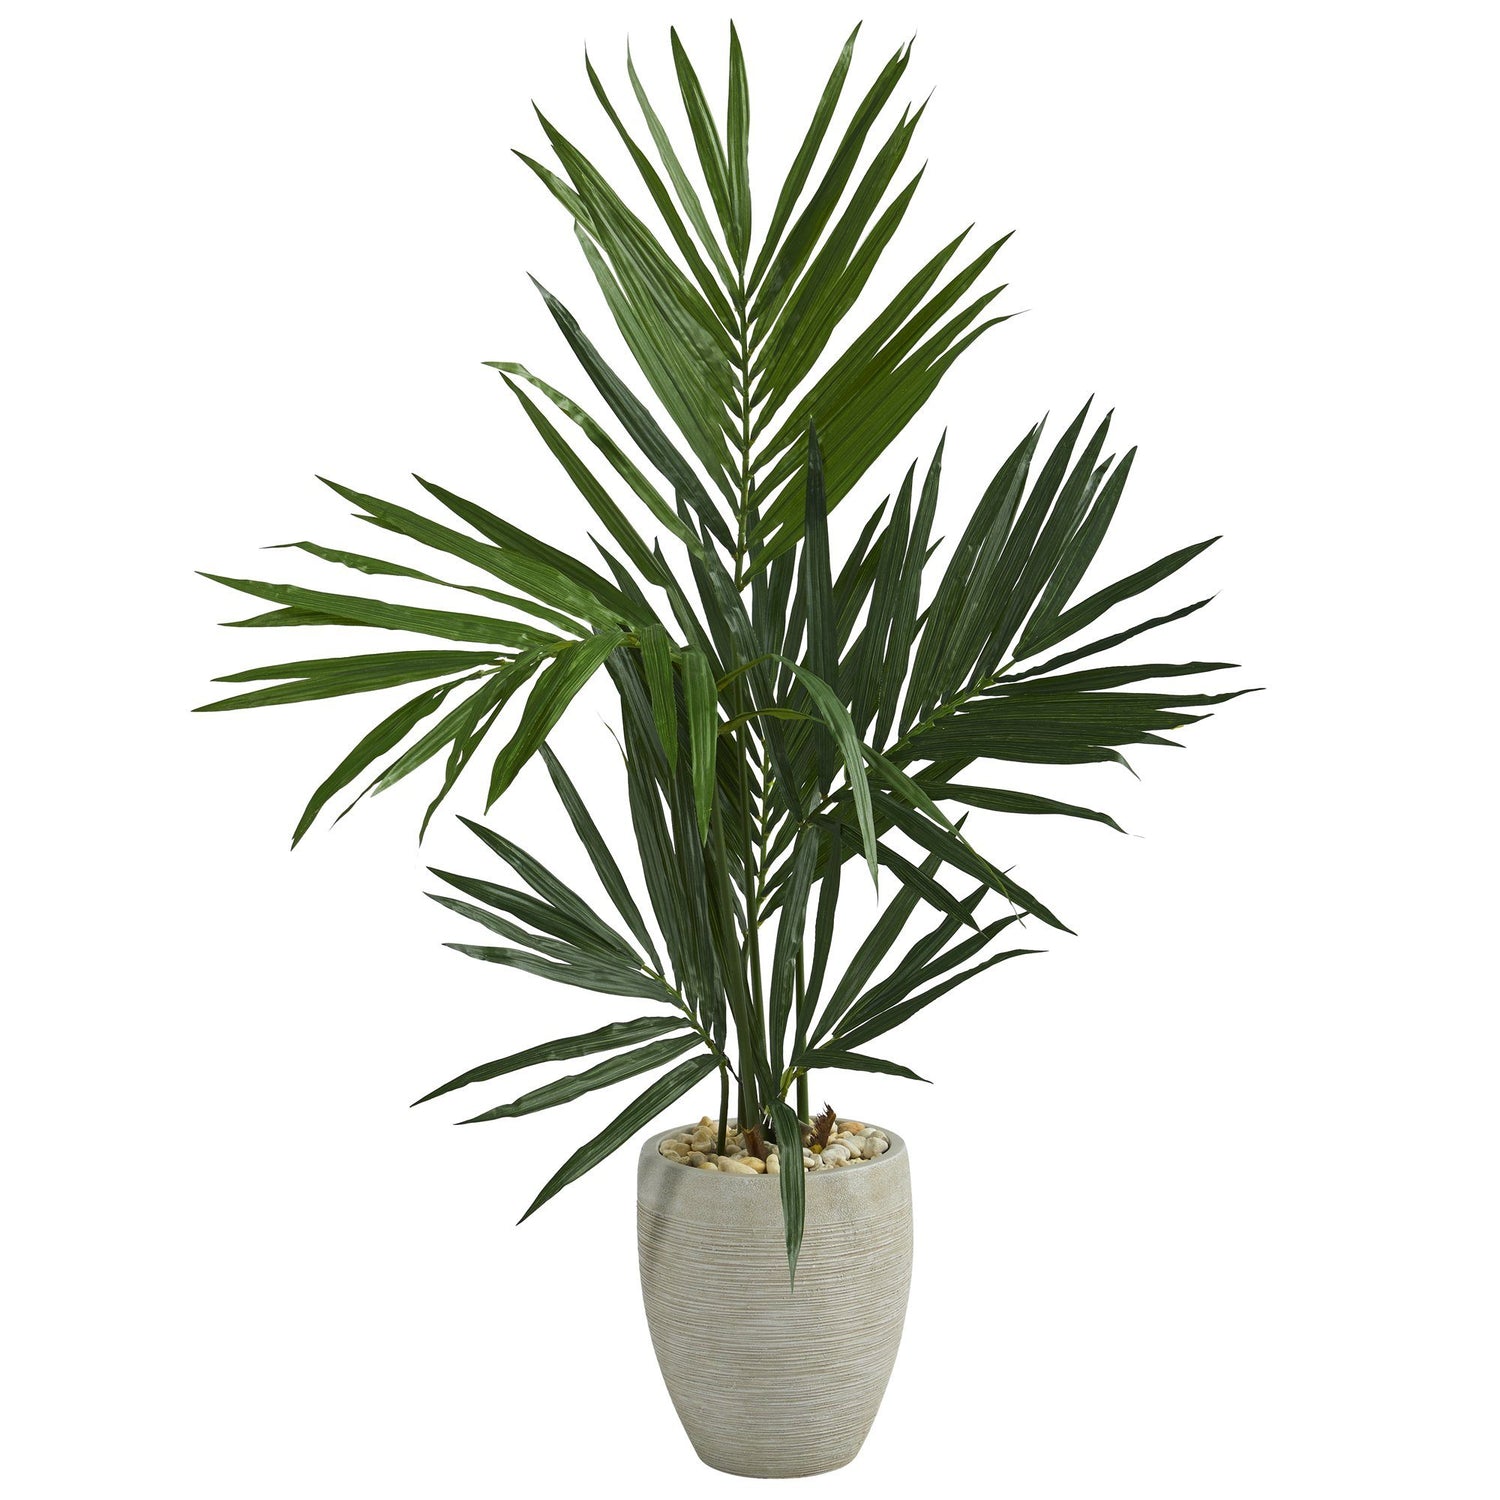 50” Kentia Artificial Palm Tree in Sand Colored Planter